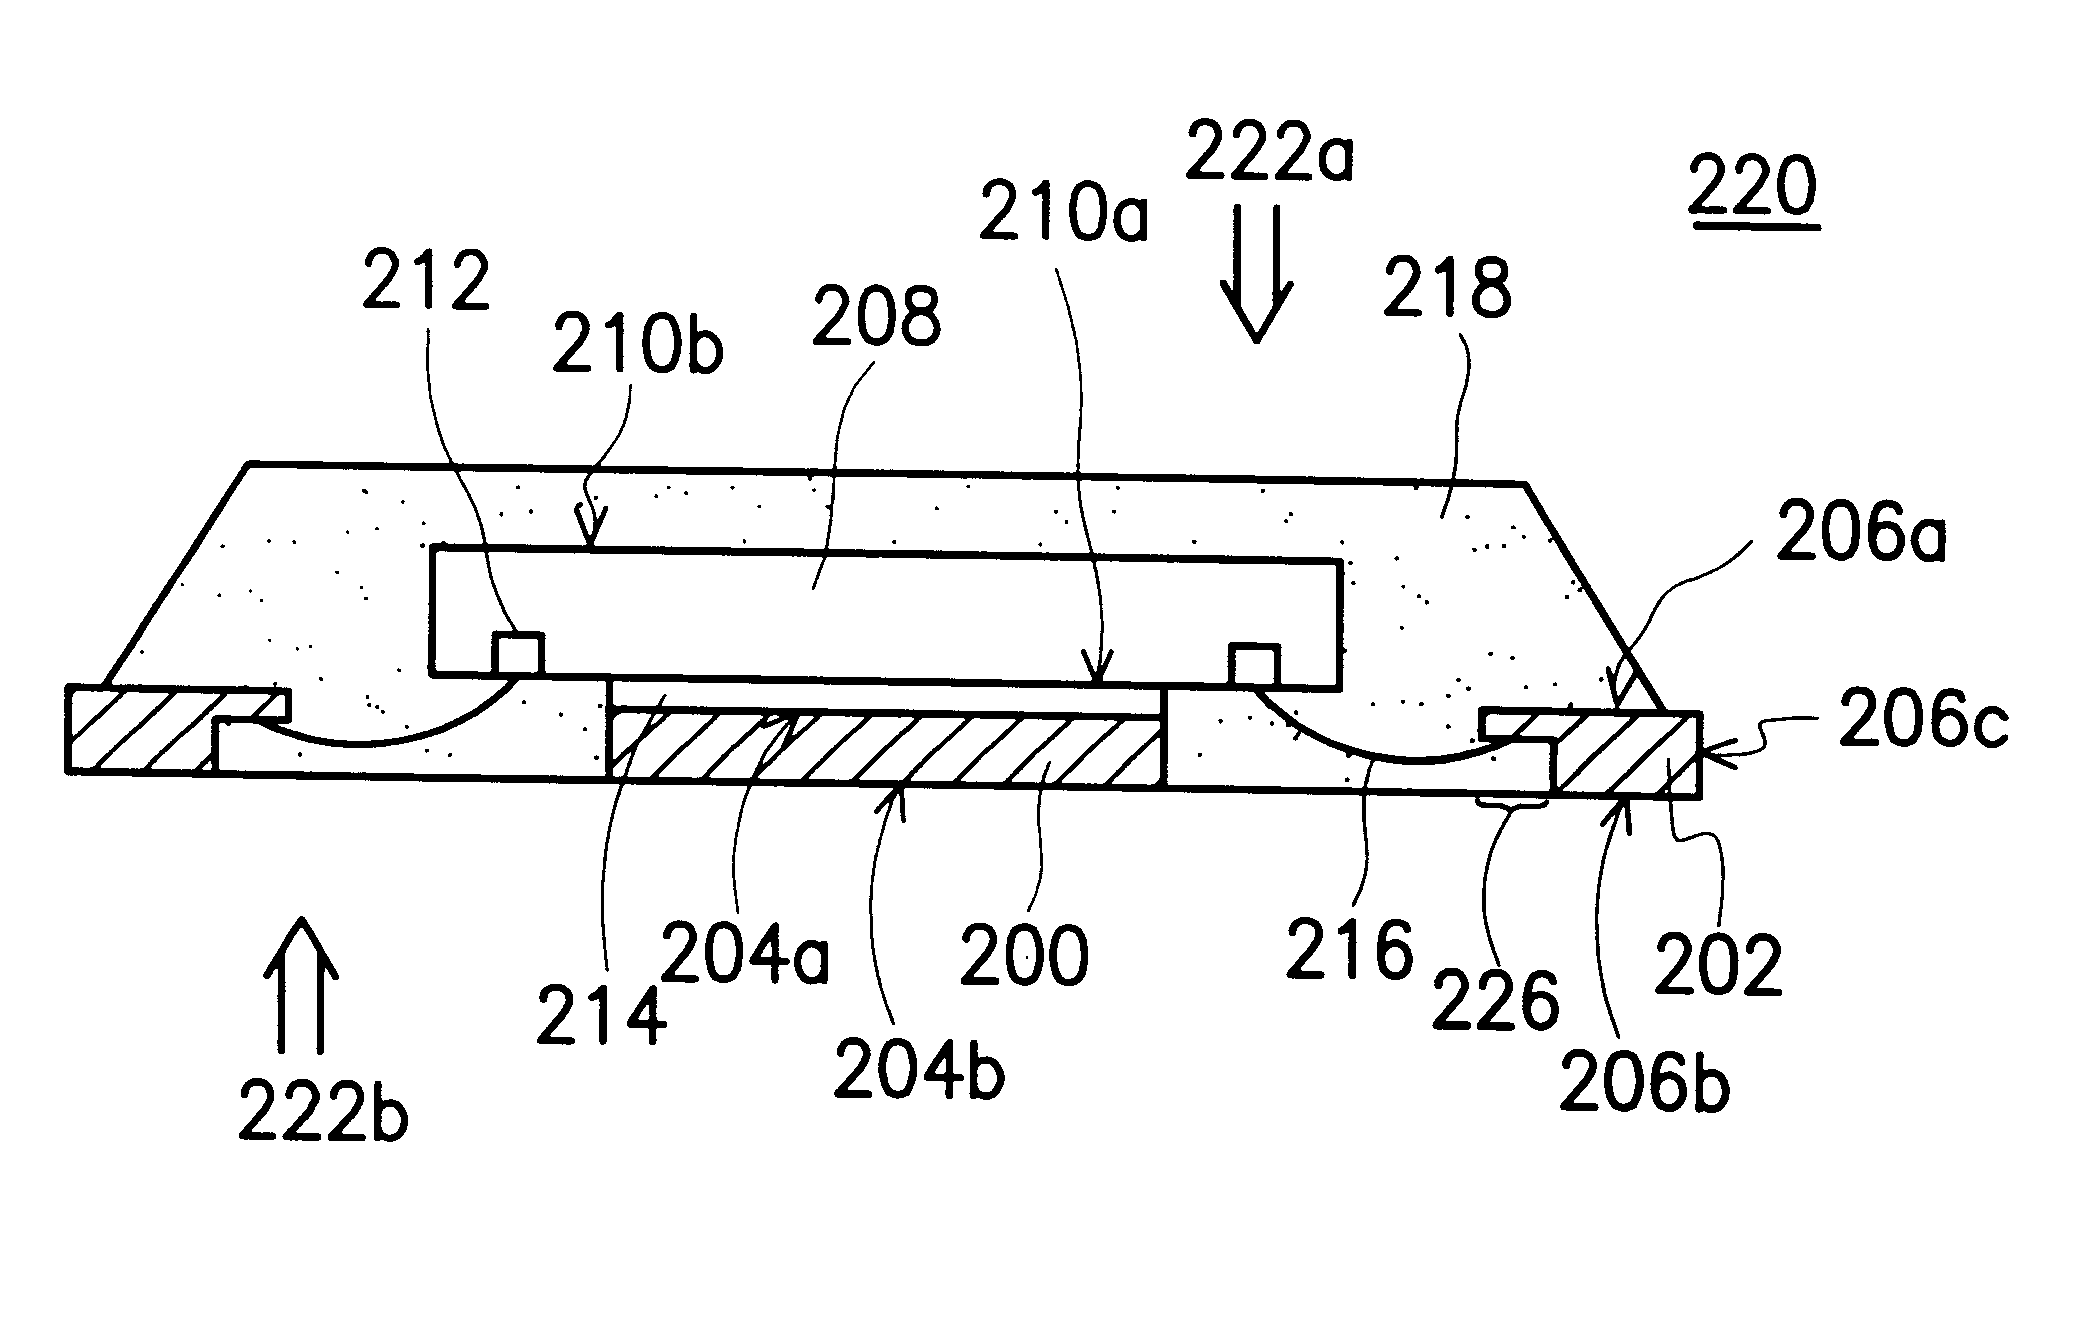 Thermally enhanced quad flat non-lead package of semiconductor